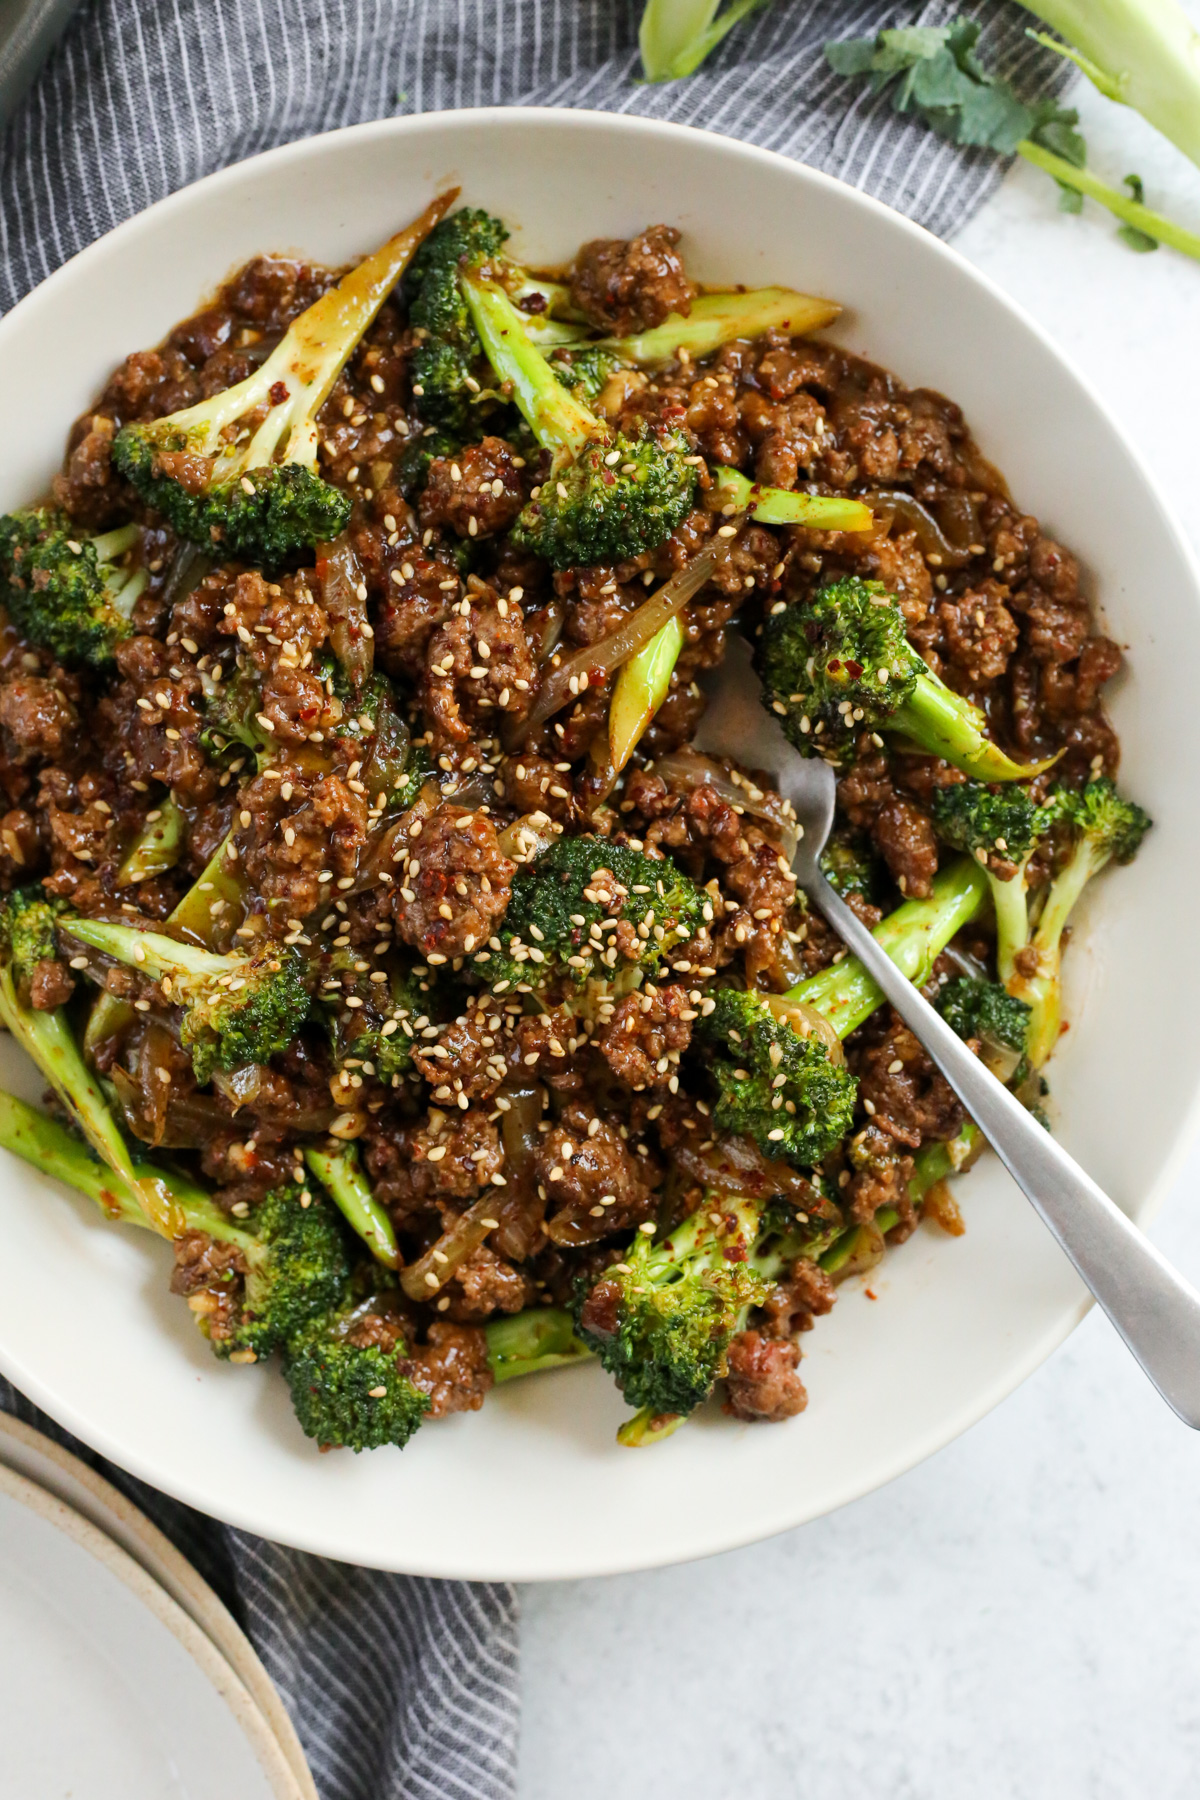 A silver serving spoon rests on the side of a bowl filled with a mixture of cooked ground beef, onions, and broccoli covered with a savory sauce and garnished with toasted sesame seeds